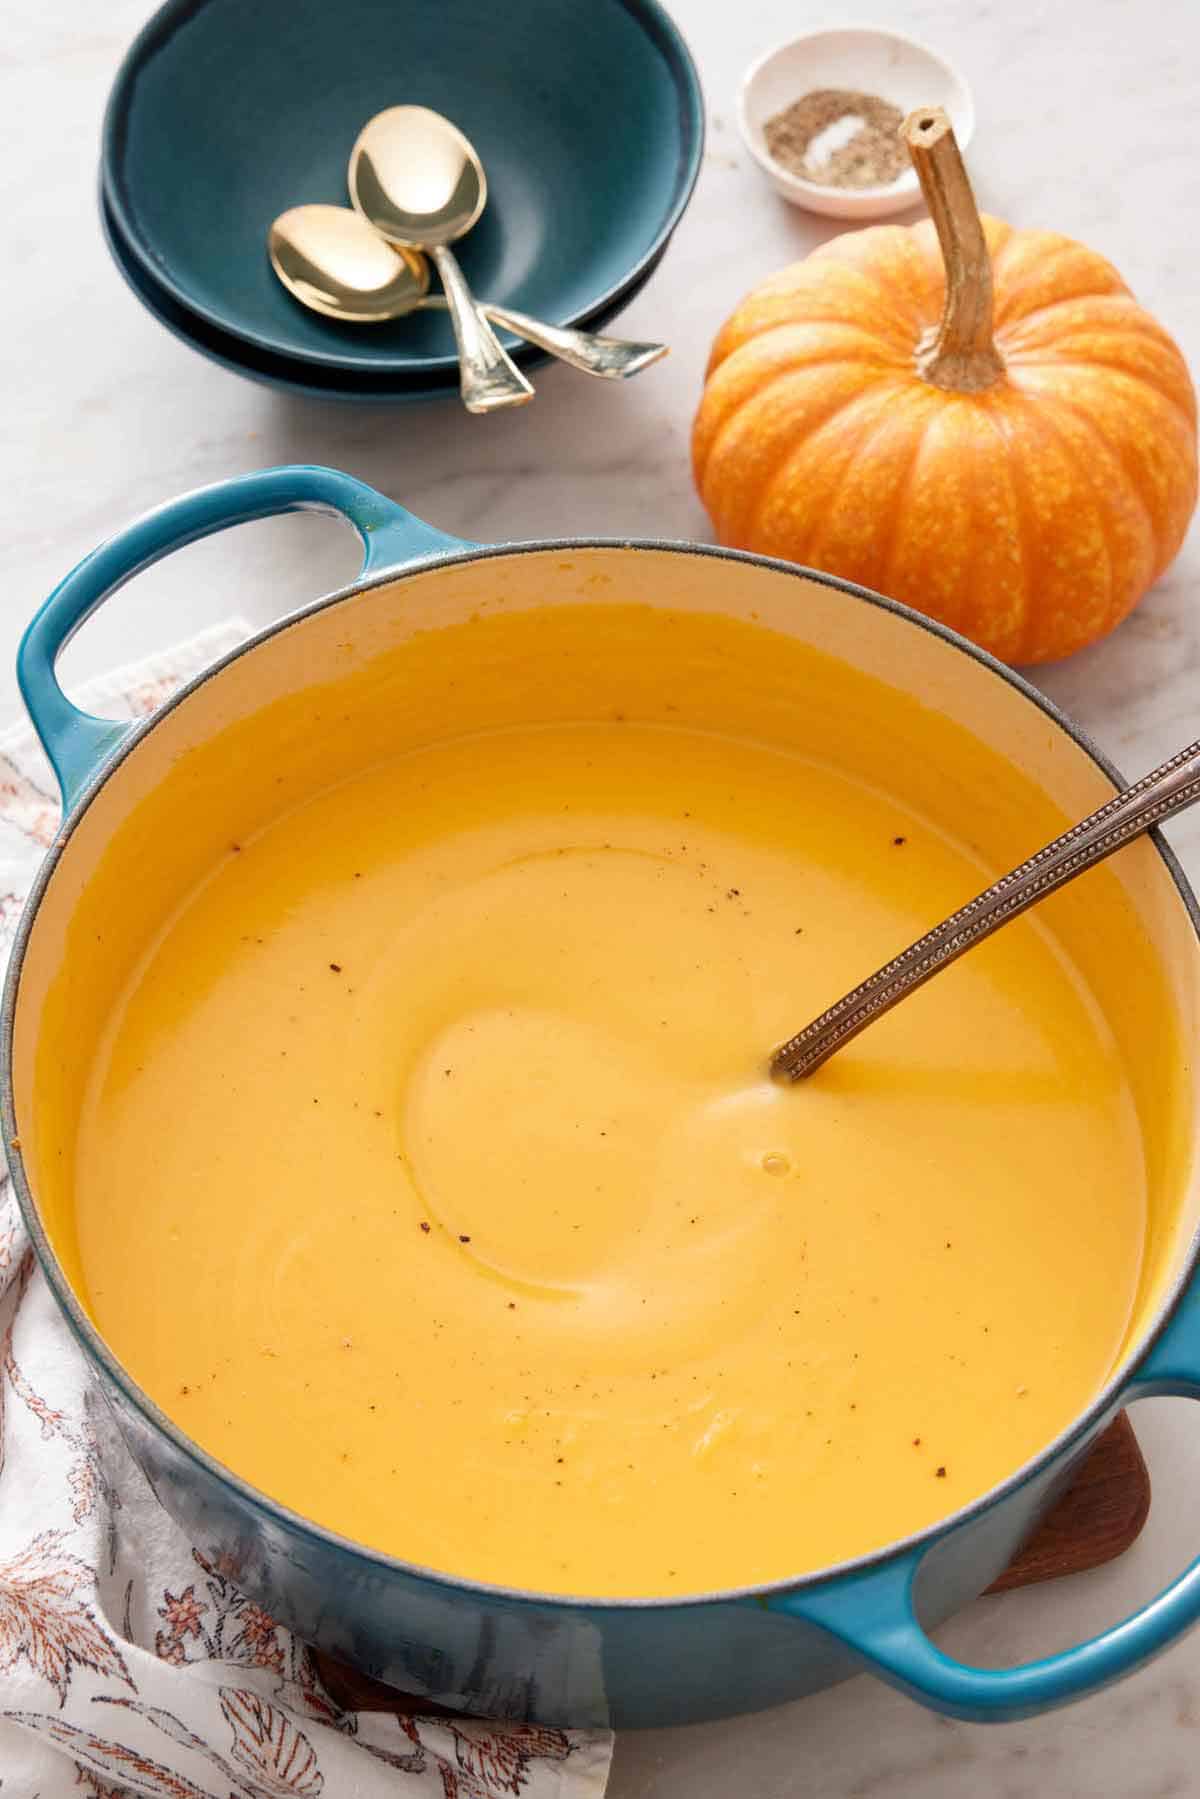 A large pot of pumpkin soup with a ladle inside. Some bowls, spoons, and a pumpkin in the background.